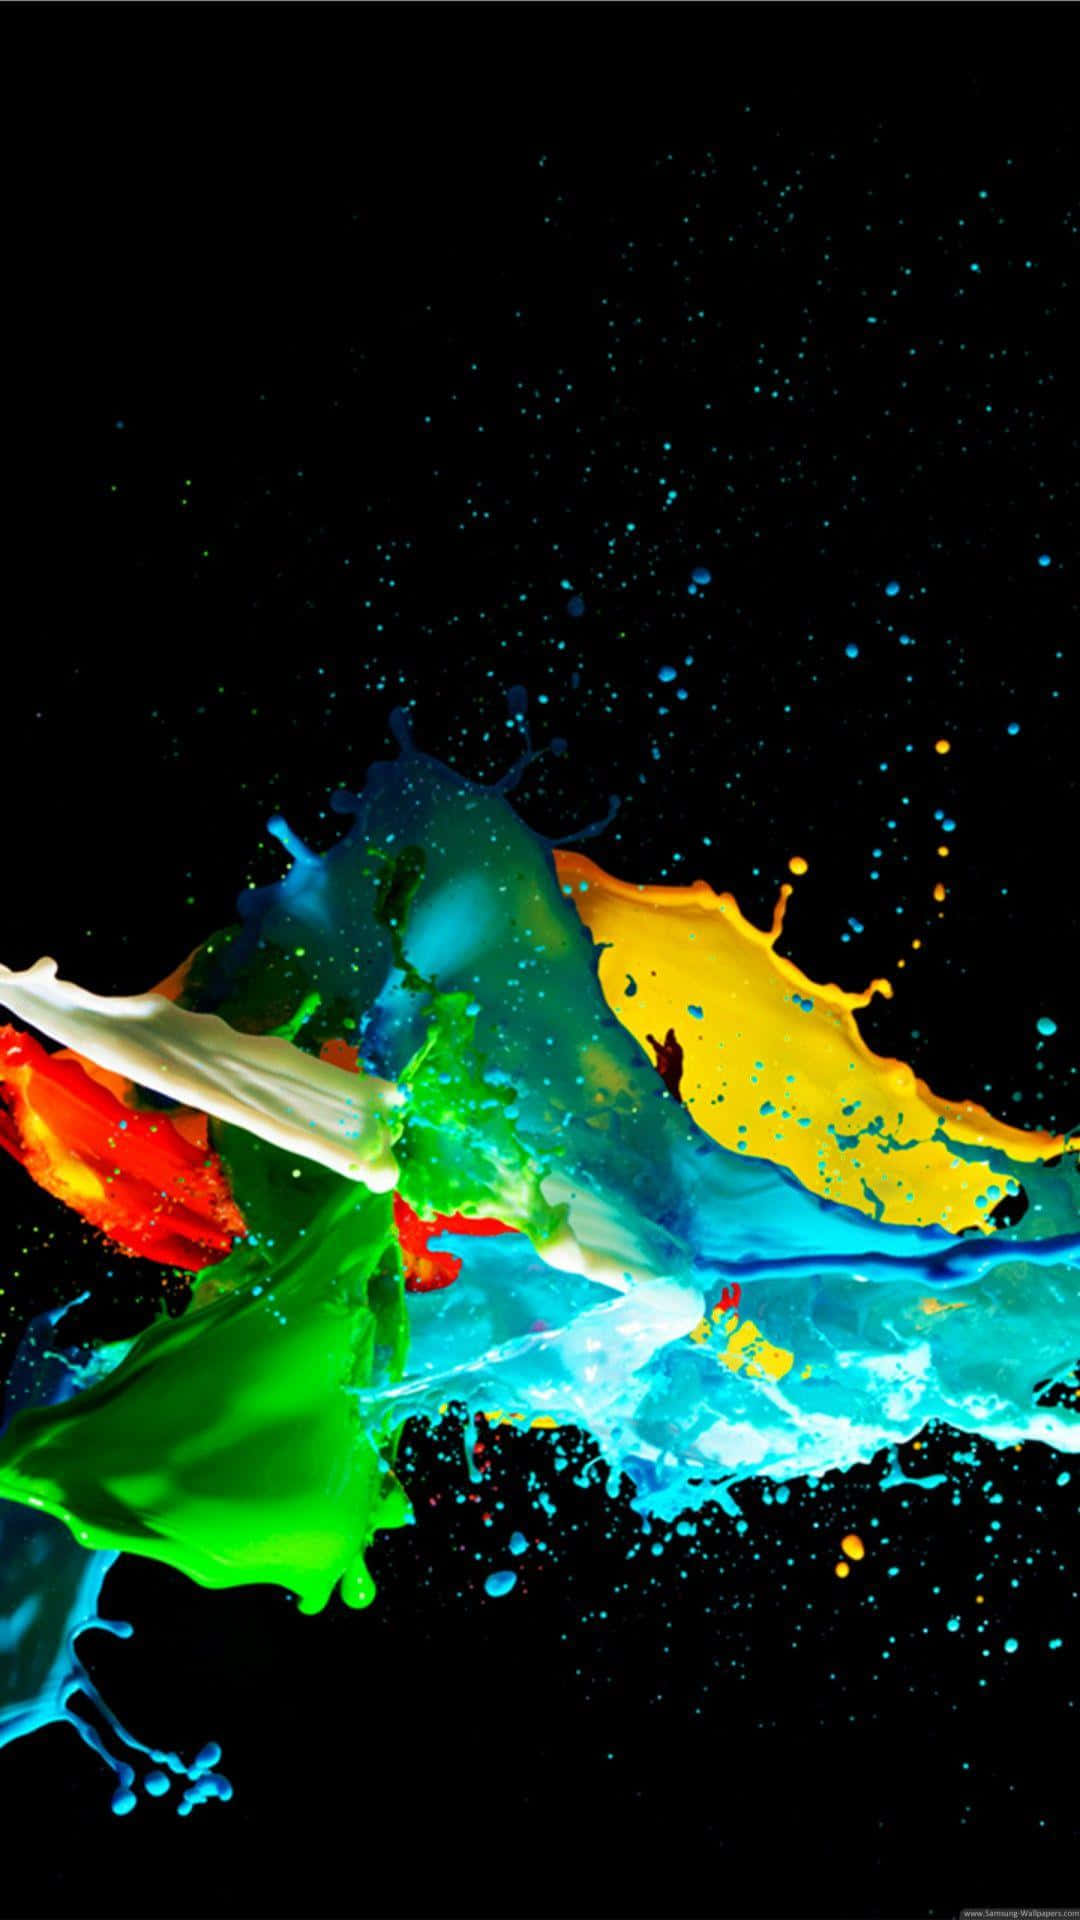 Immerse yourself in beautiful Amoled colors with the Samsung experience Wallpaper